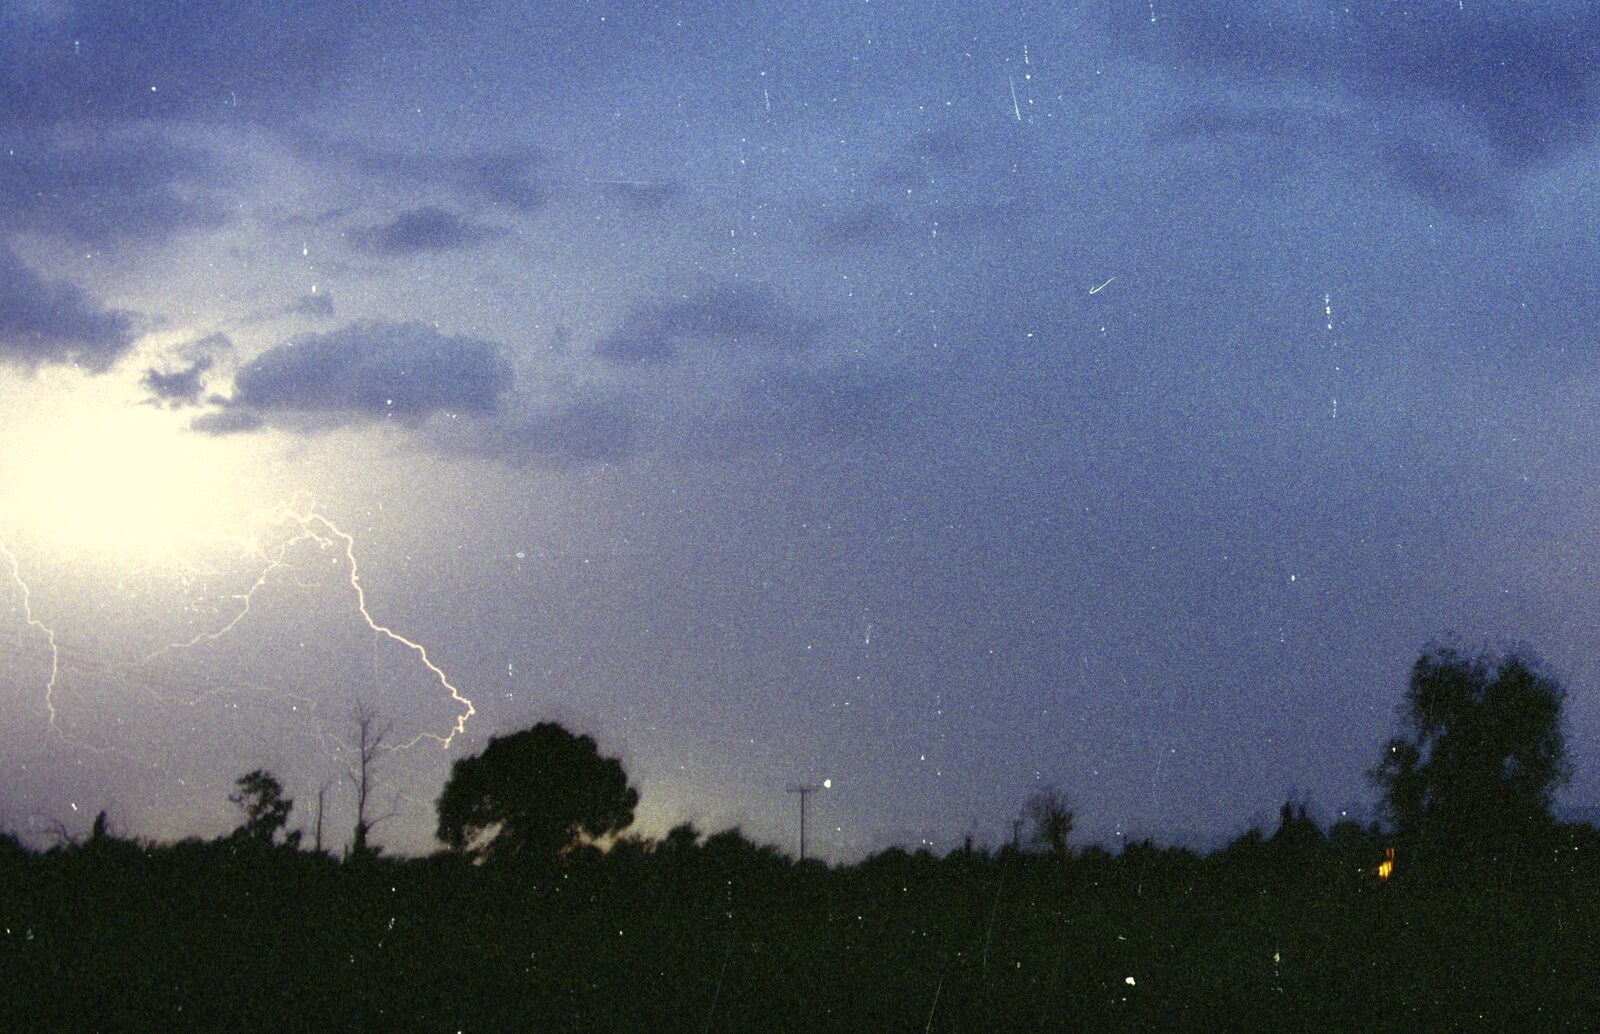 More forked lightning from House Renovation Randomness and a Spot of Lightning, Brome, Suffolk - 19th June 1994